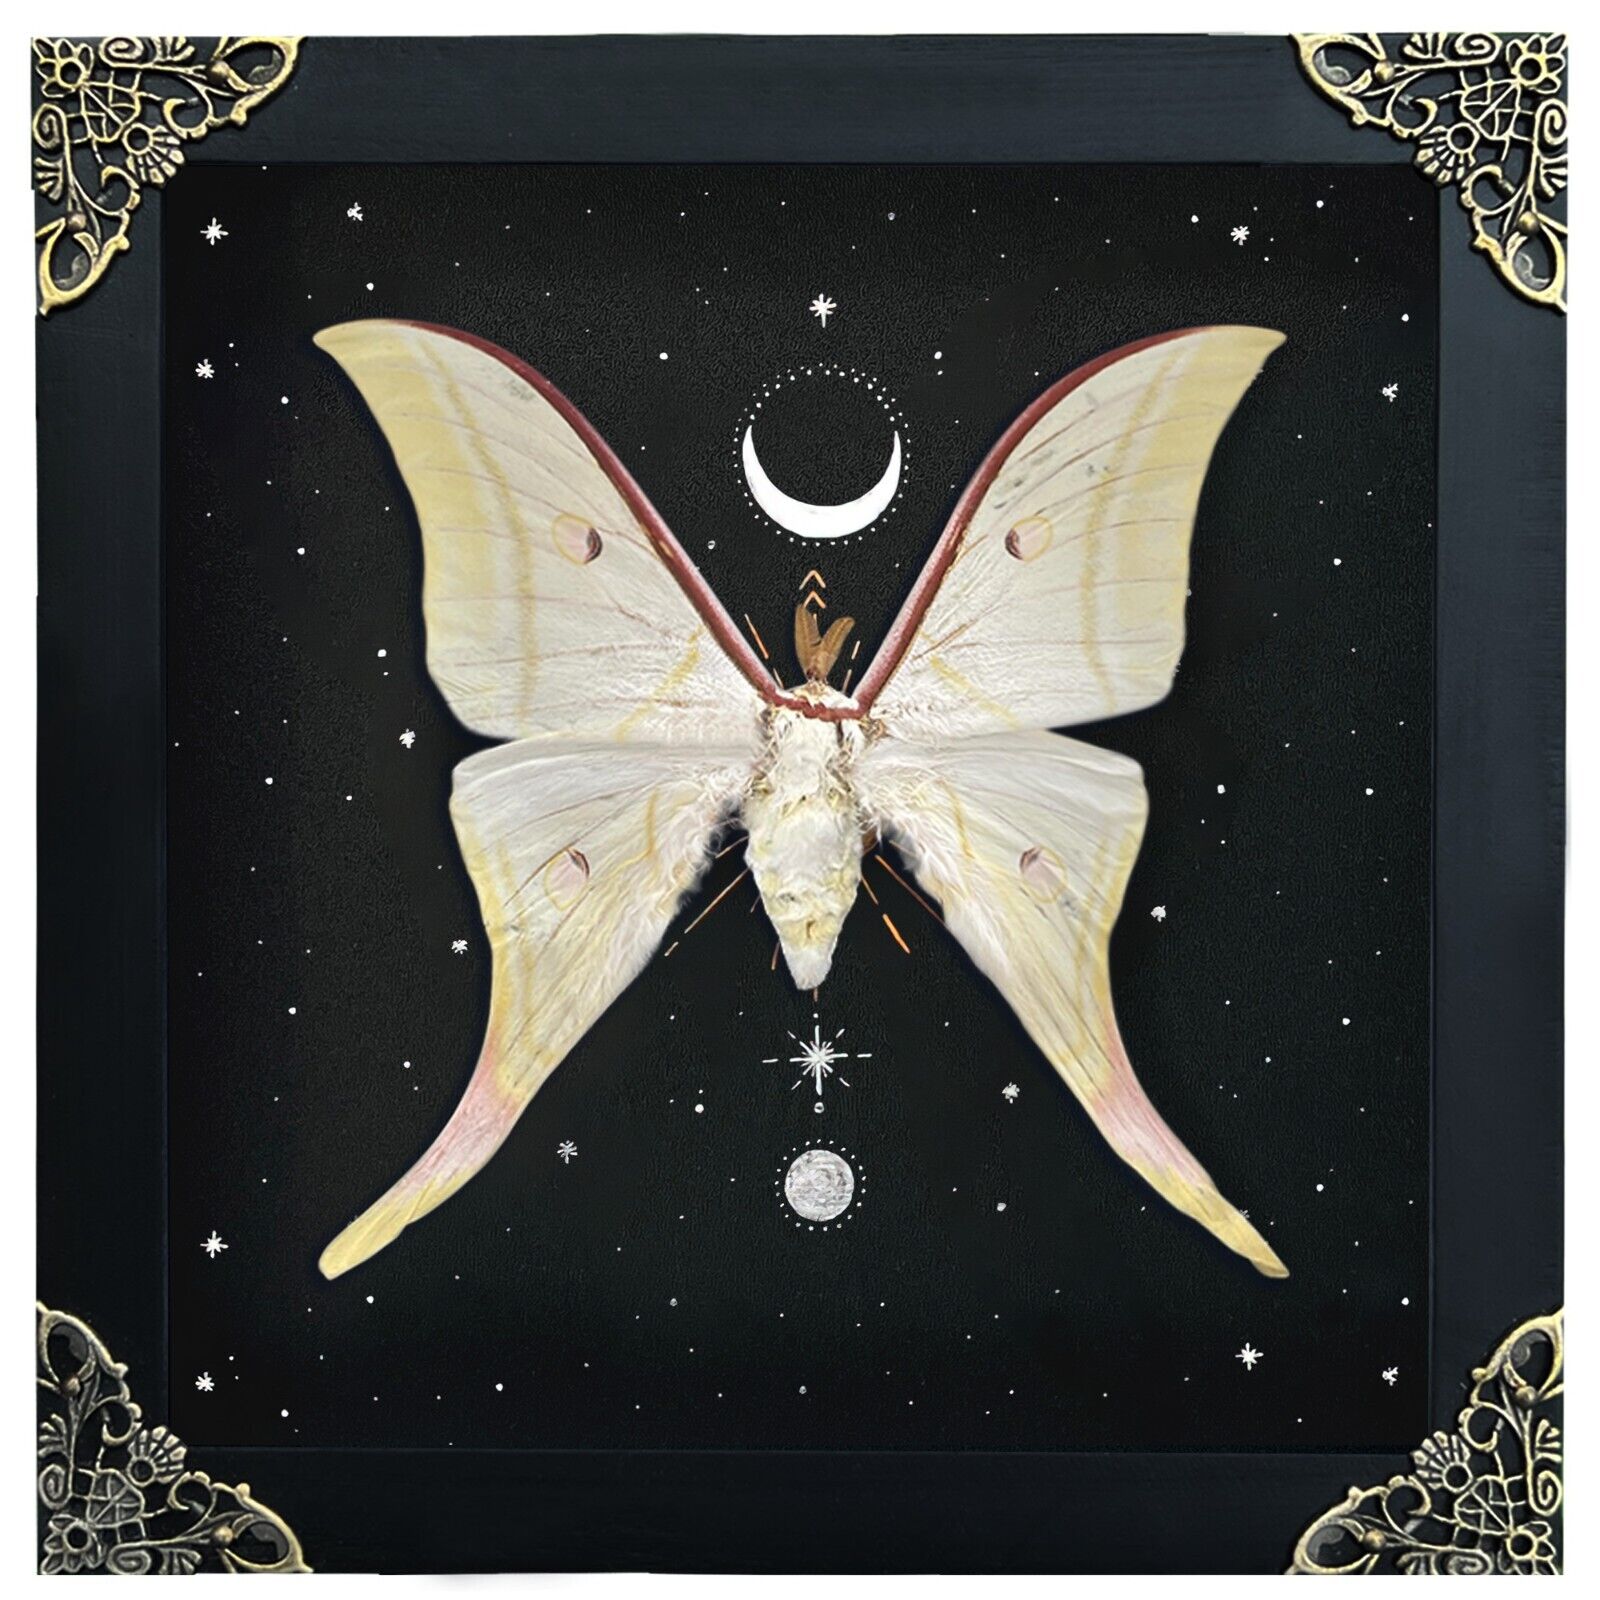 Handmade Framed Luna Moth Astronomy Decor Taxadermy Insect Gift For Her